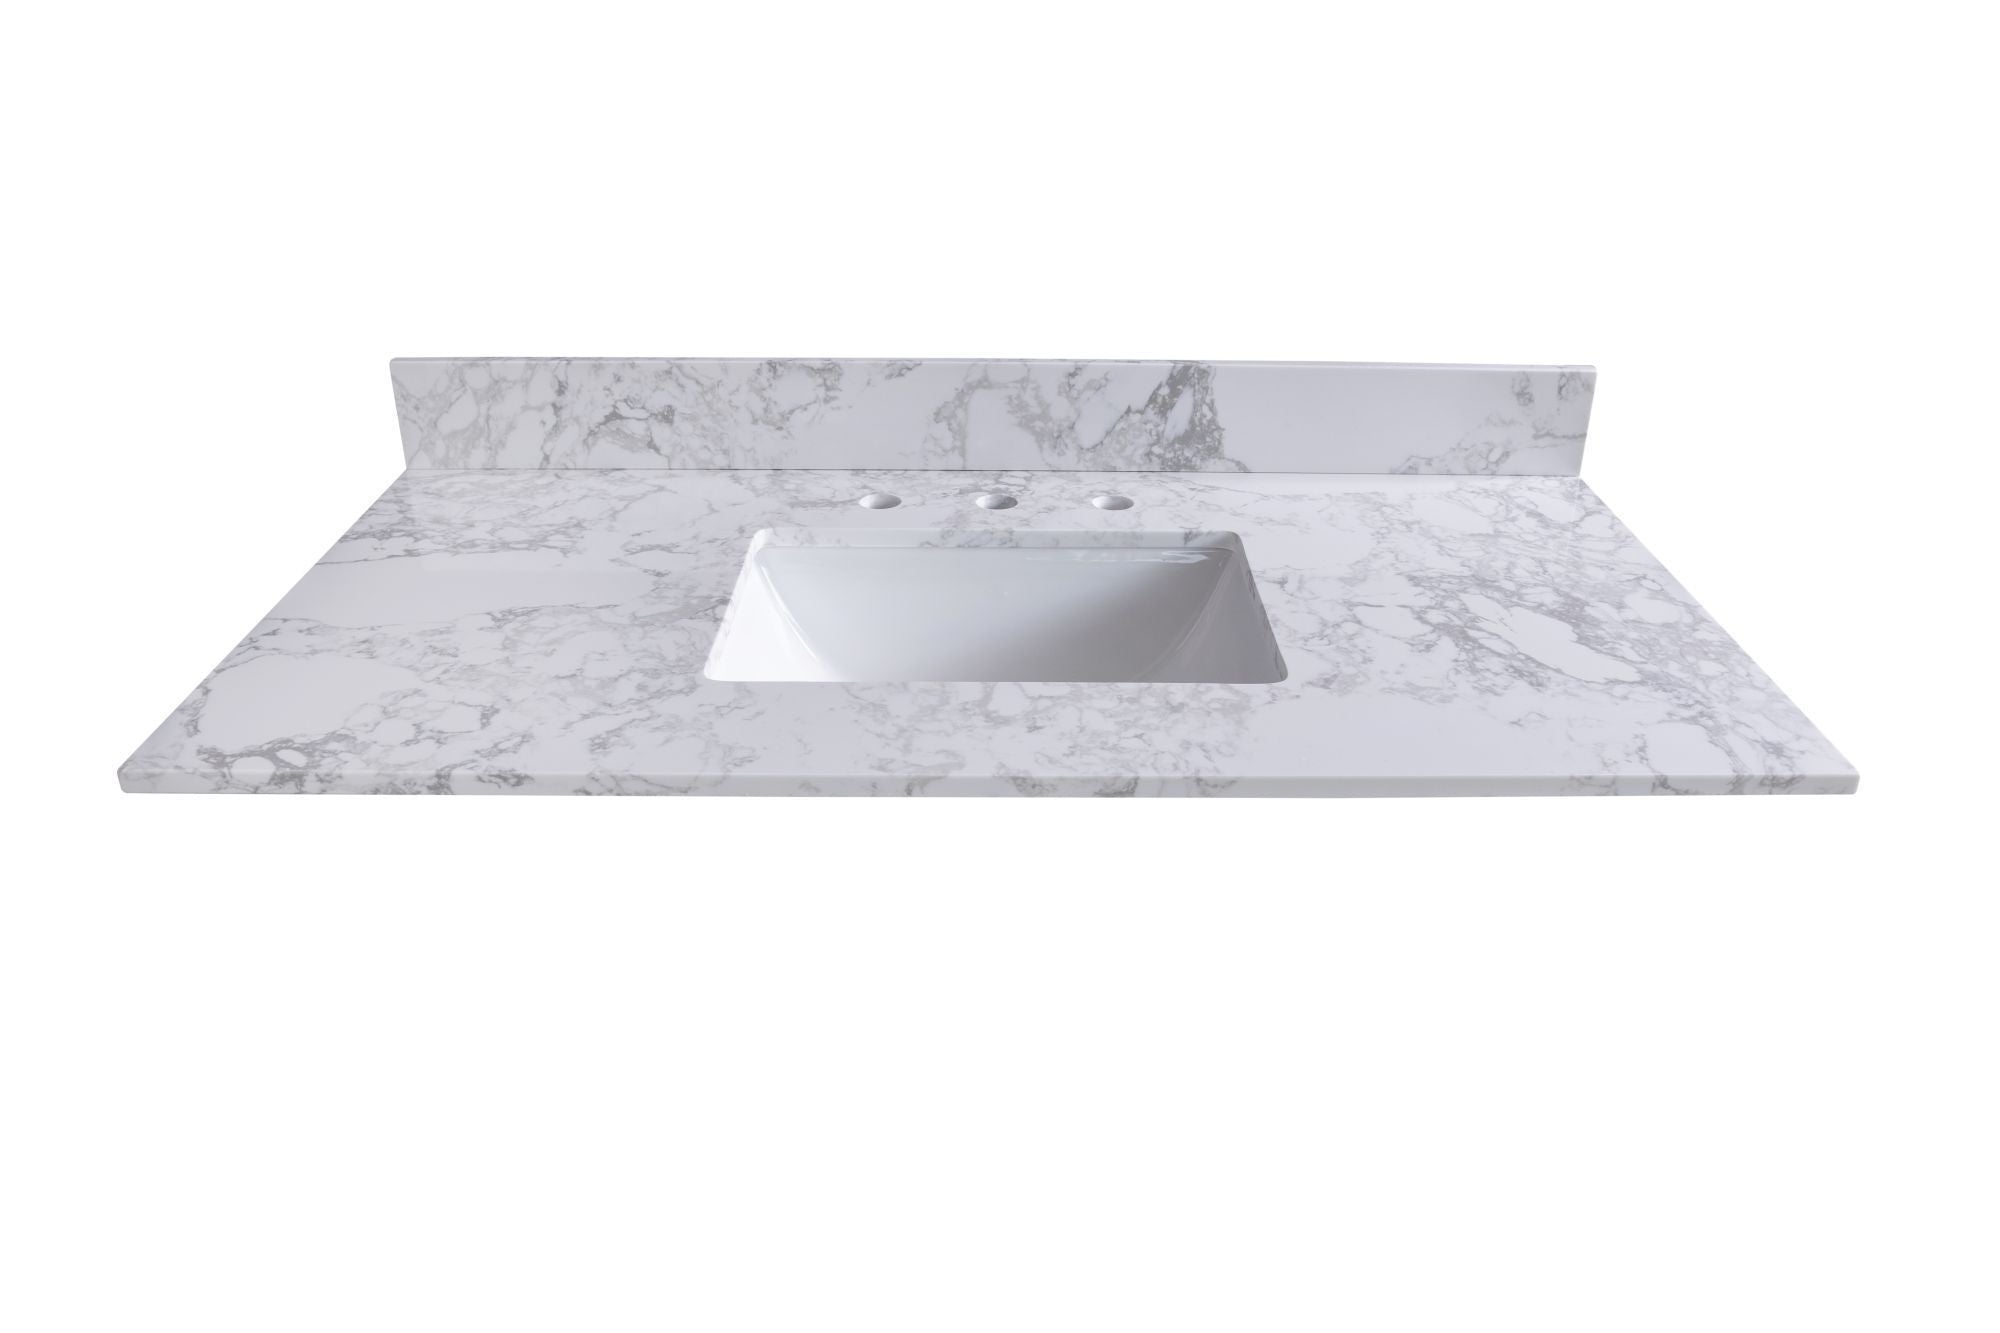 Bathroom stone vanity top  engineered stone carrara white marble color with rectangle undermount ceramic sink and  3 faucet hole with back splash-Boyel Living